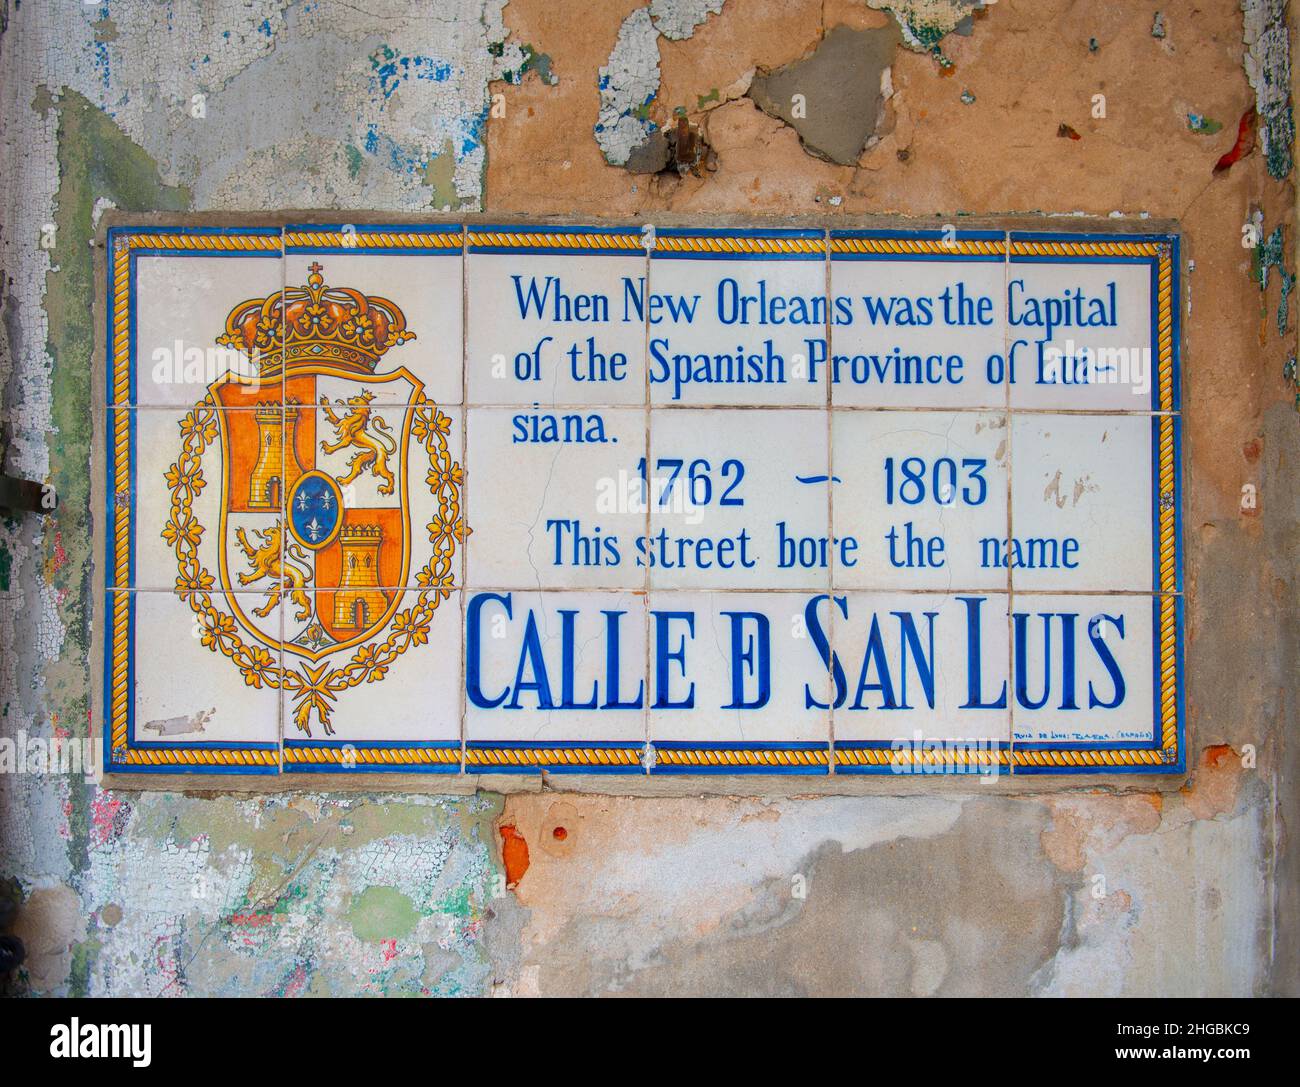 St Louis Street Sign with historic road name as Calle de San Luis in Spanish in French Quarter in New Orleans, Louisiana LA, USA. Stock Photo